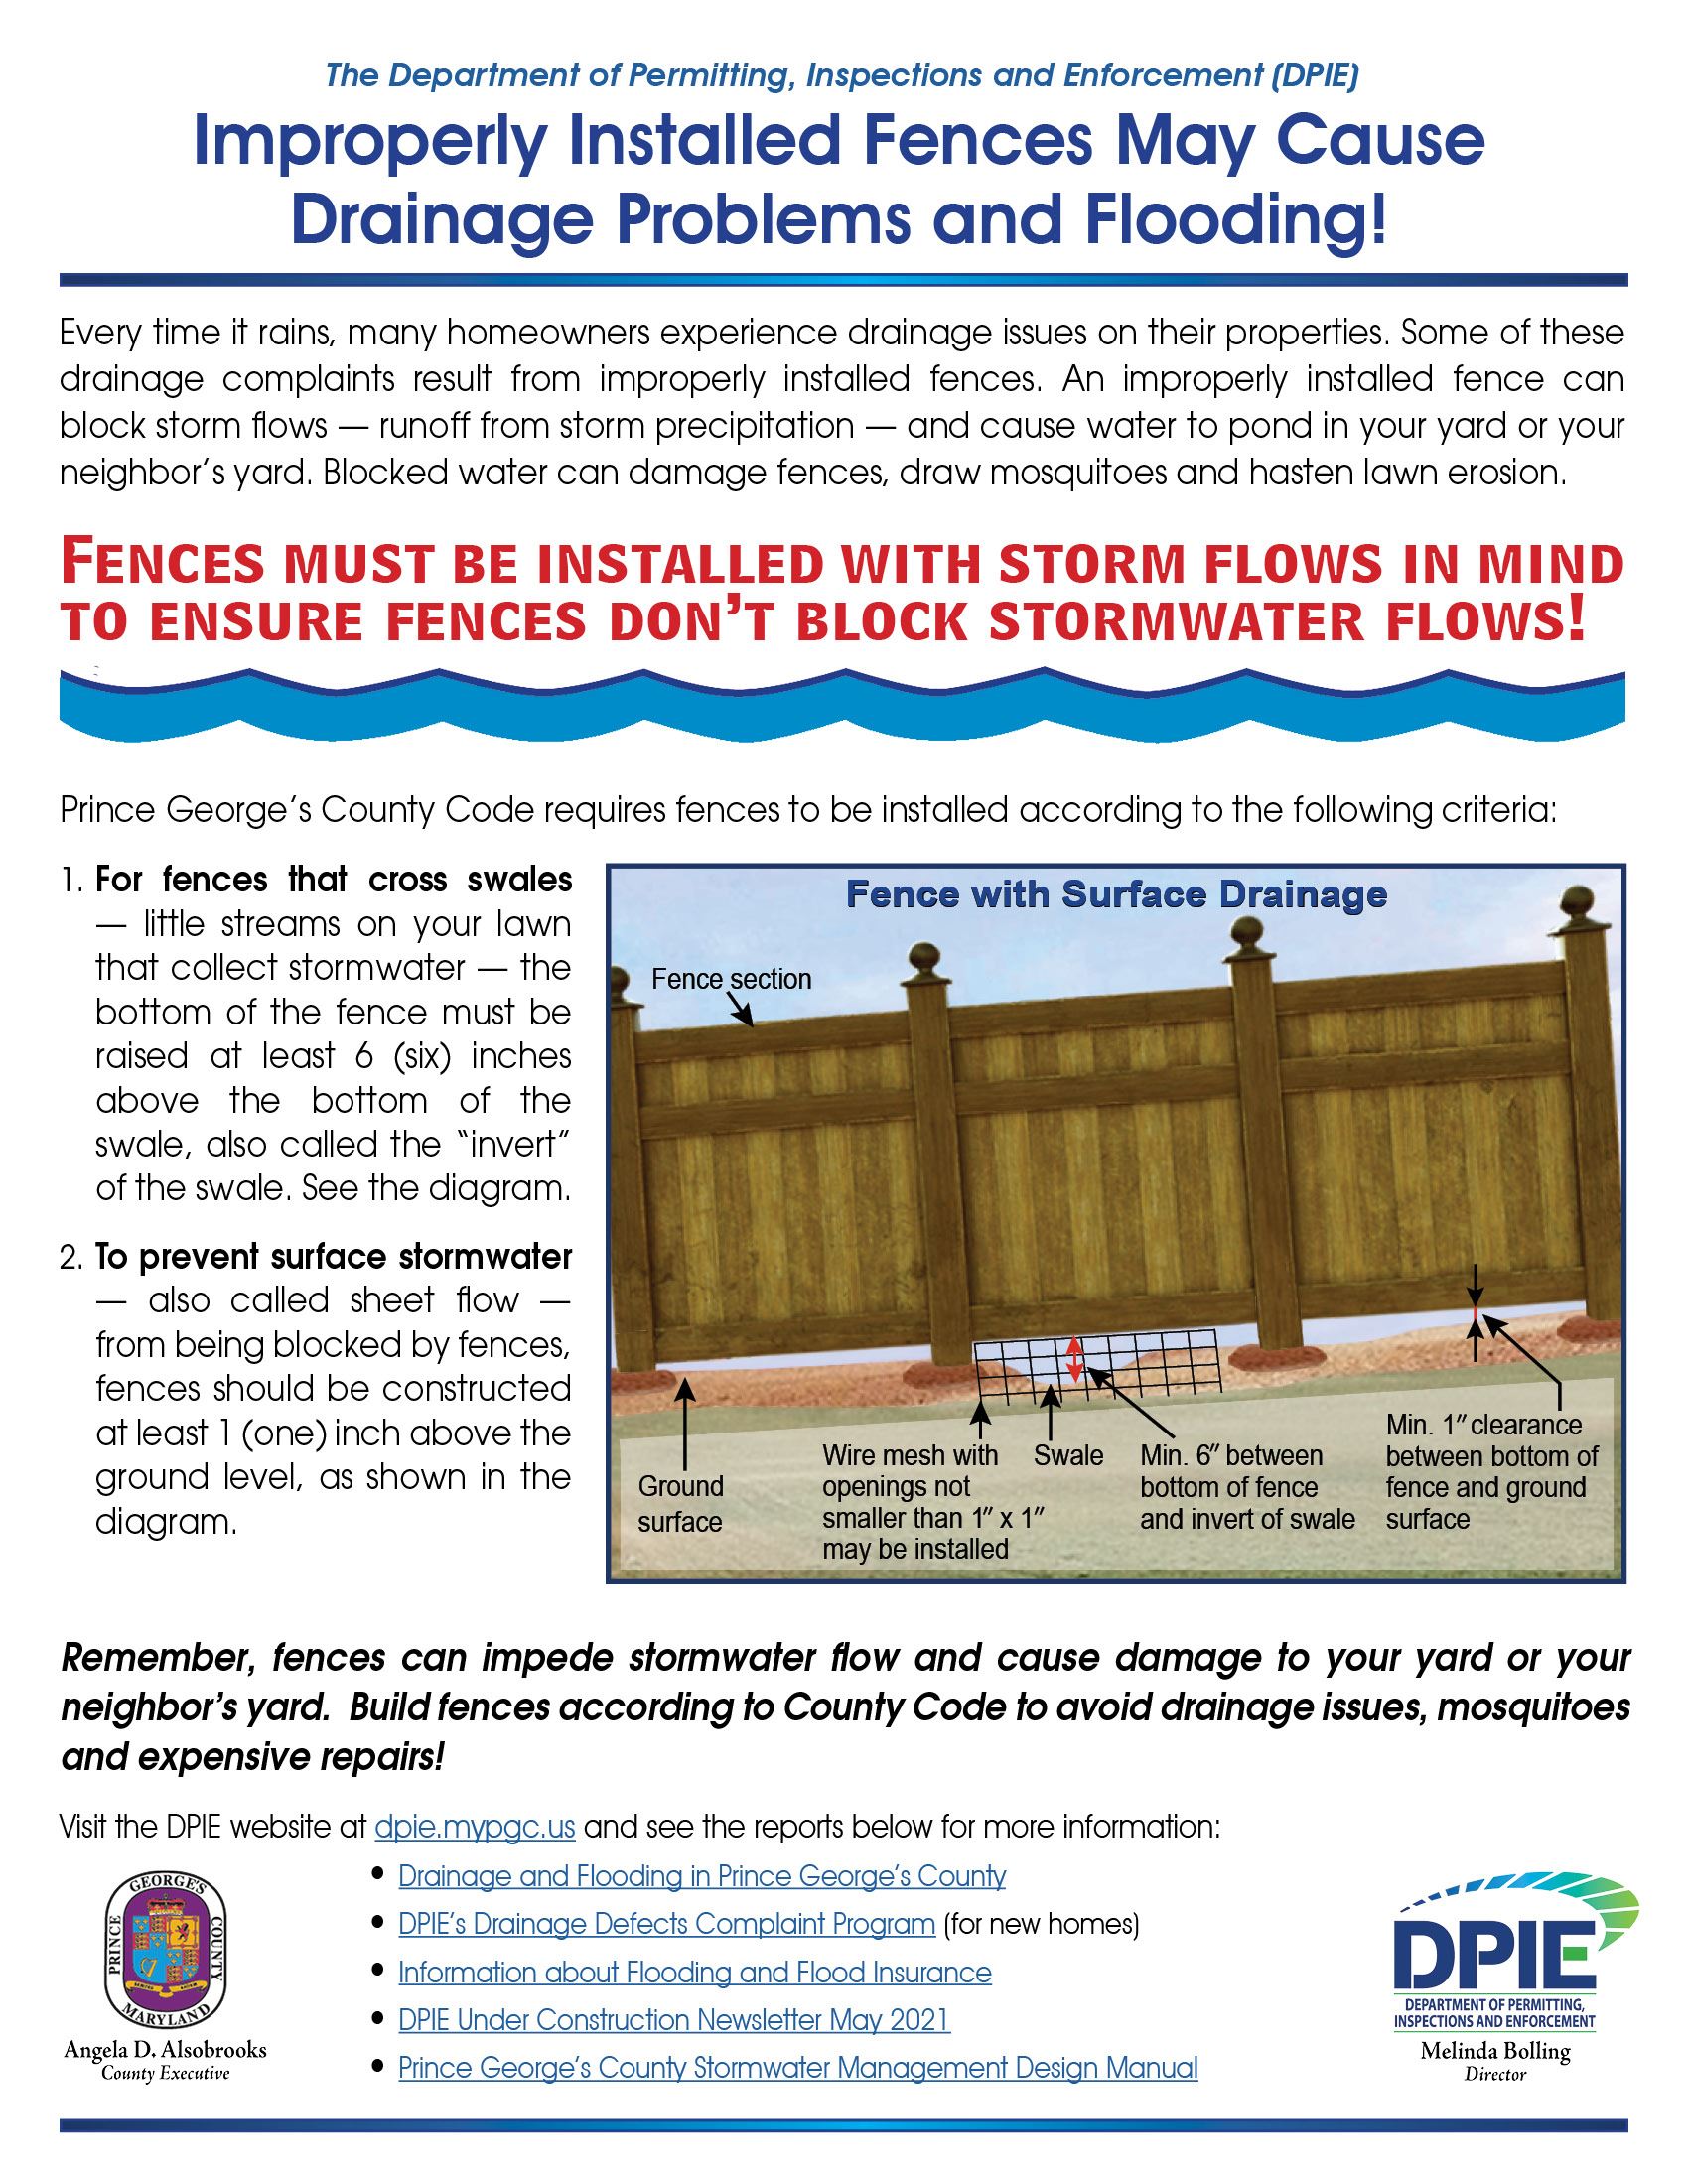 Improperly Installed Fences May Cause Drainage Problems and Flooding!